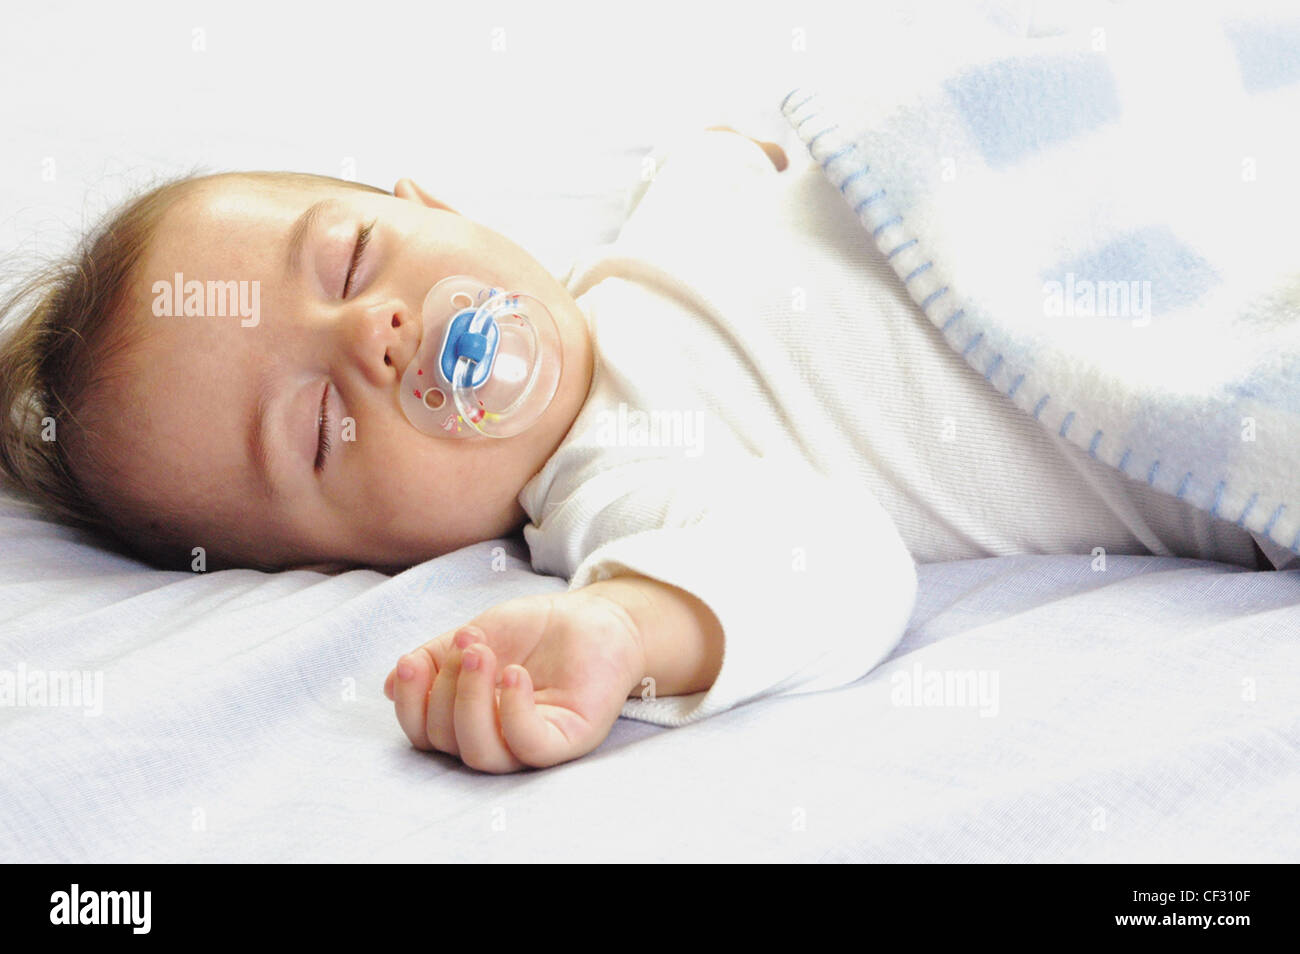 Making sense of sleep Knowing about babies sleep will help you find the best sleep routineyour baby Our sleep expert shares Stock Photo